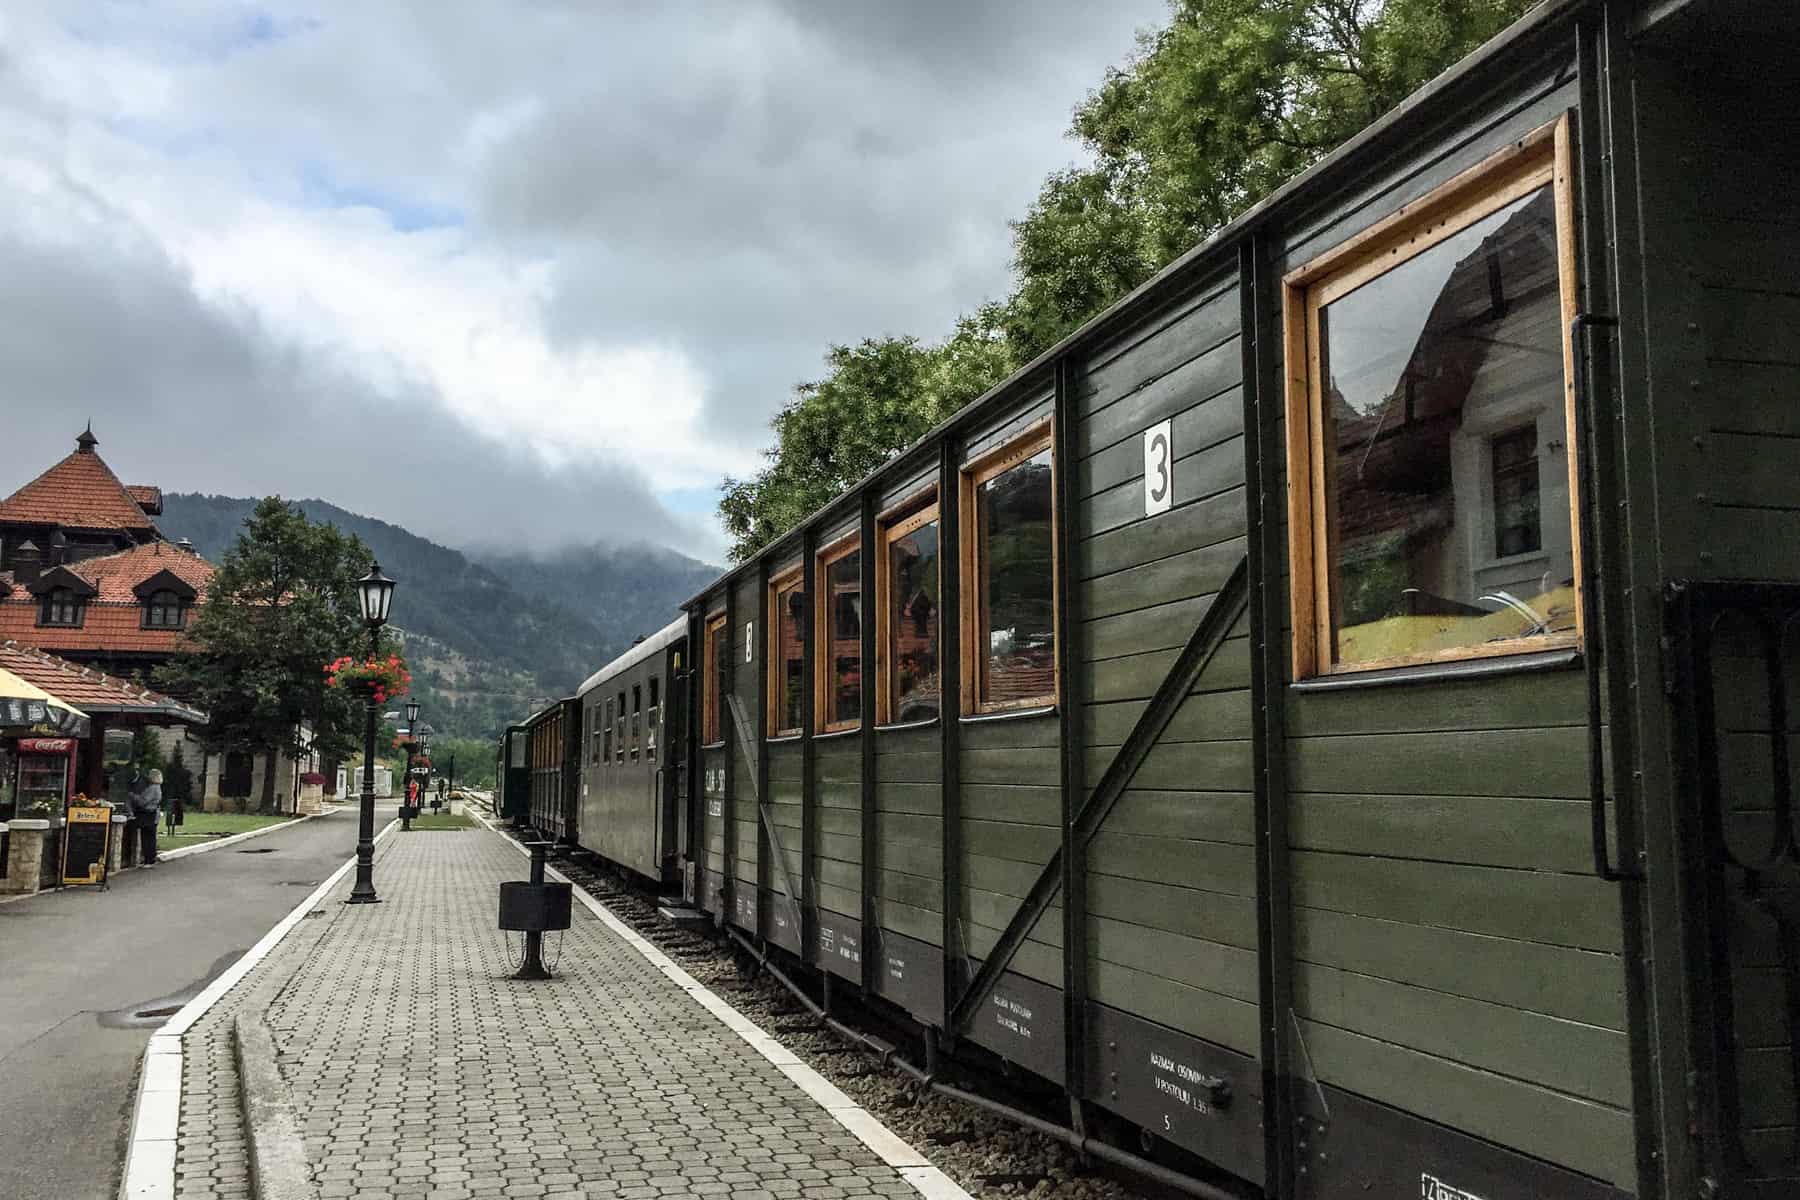 A dark green wood panelled train - The Sargan Eight Railway in Serbia - at the station platform with orange roofed buildings, in the direction of the mountains.